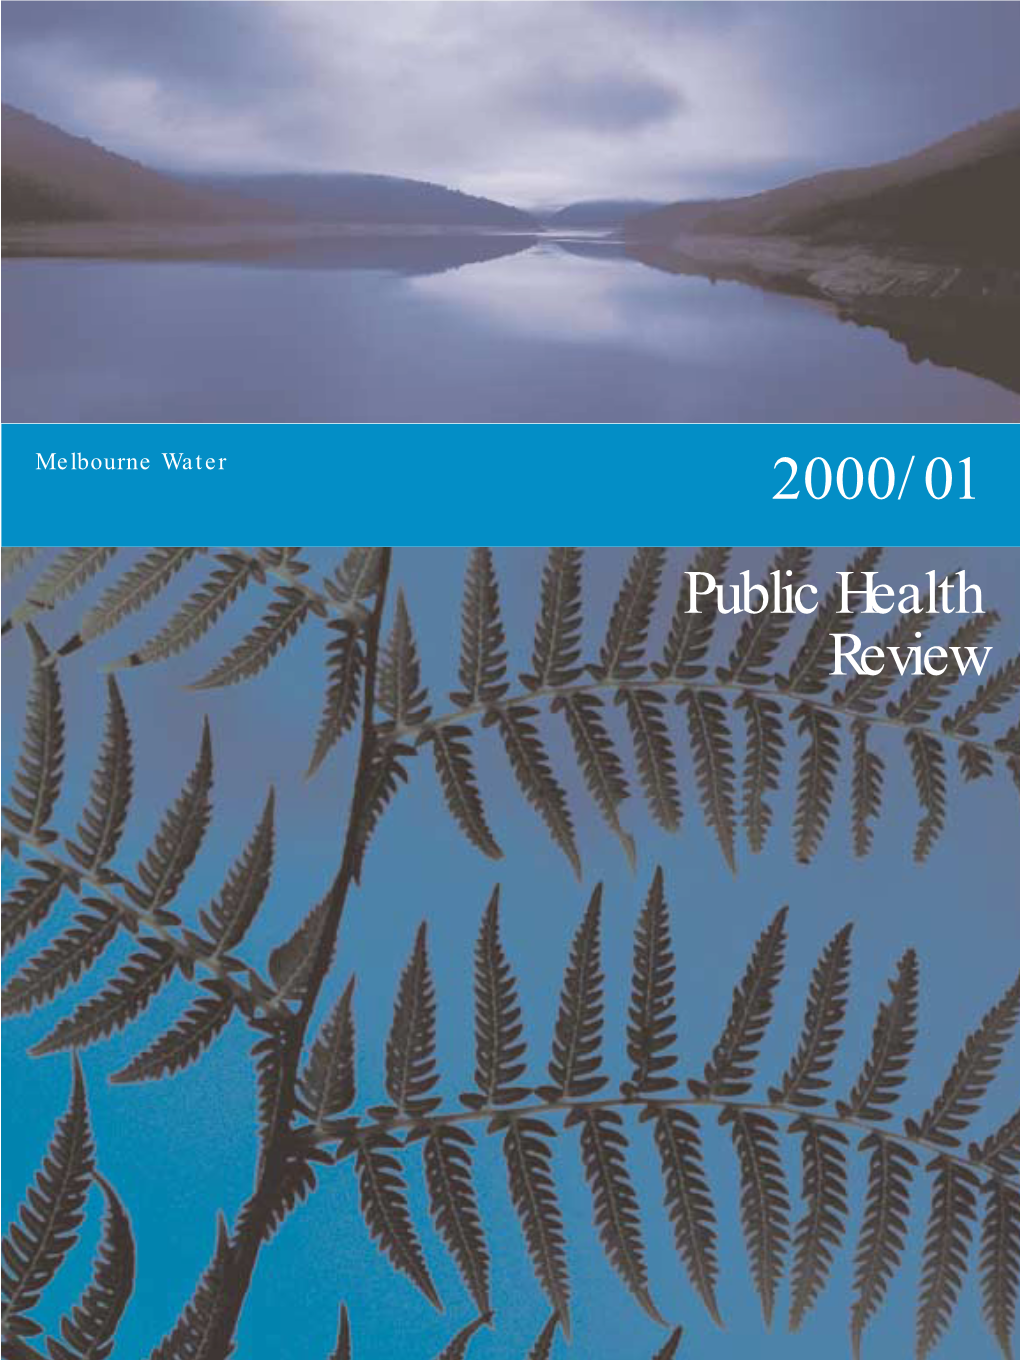 Public Health Review 2000/01 (The ‘Report’)